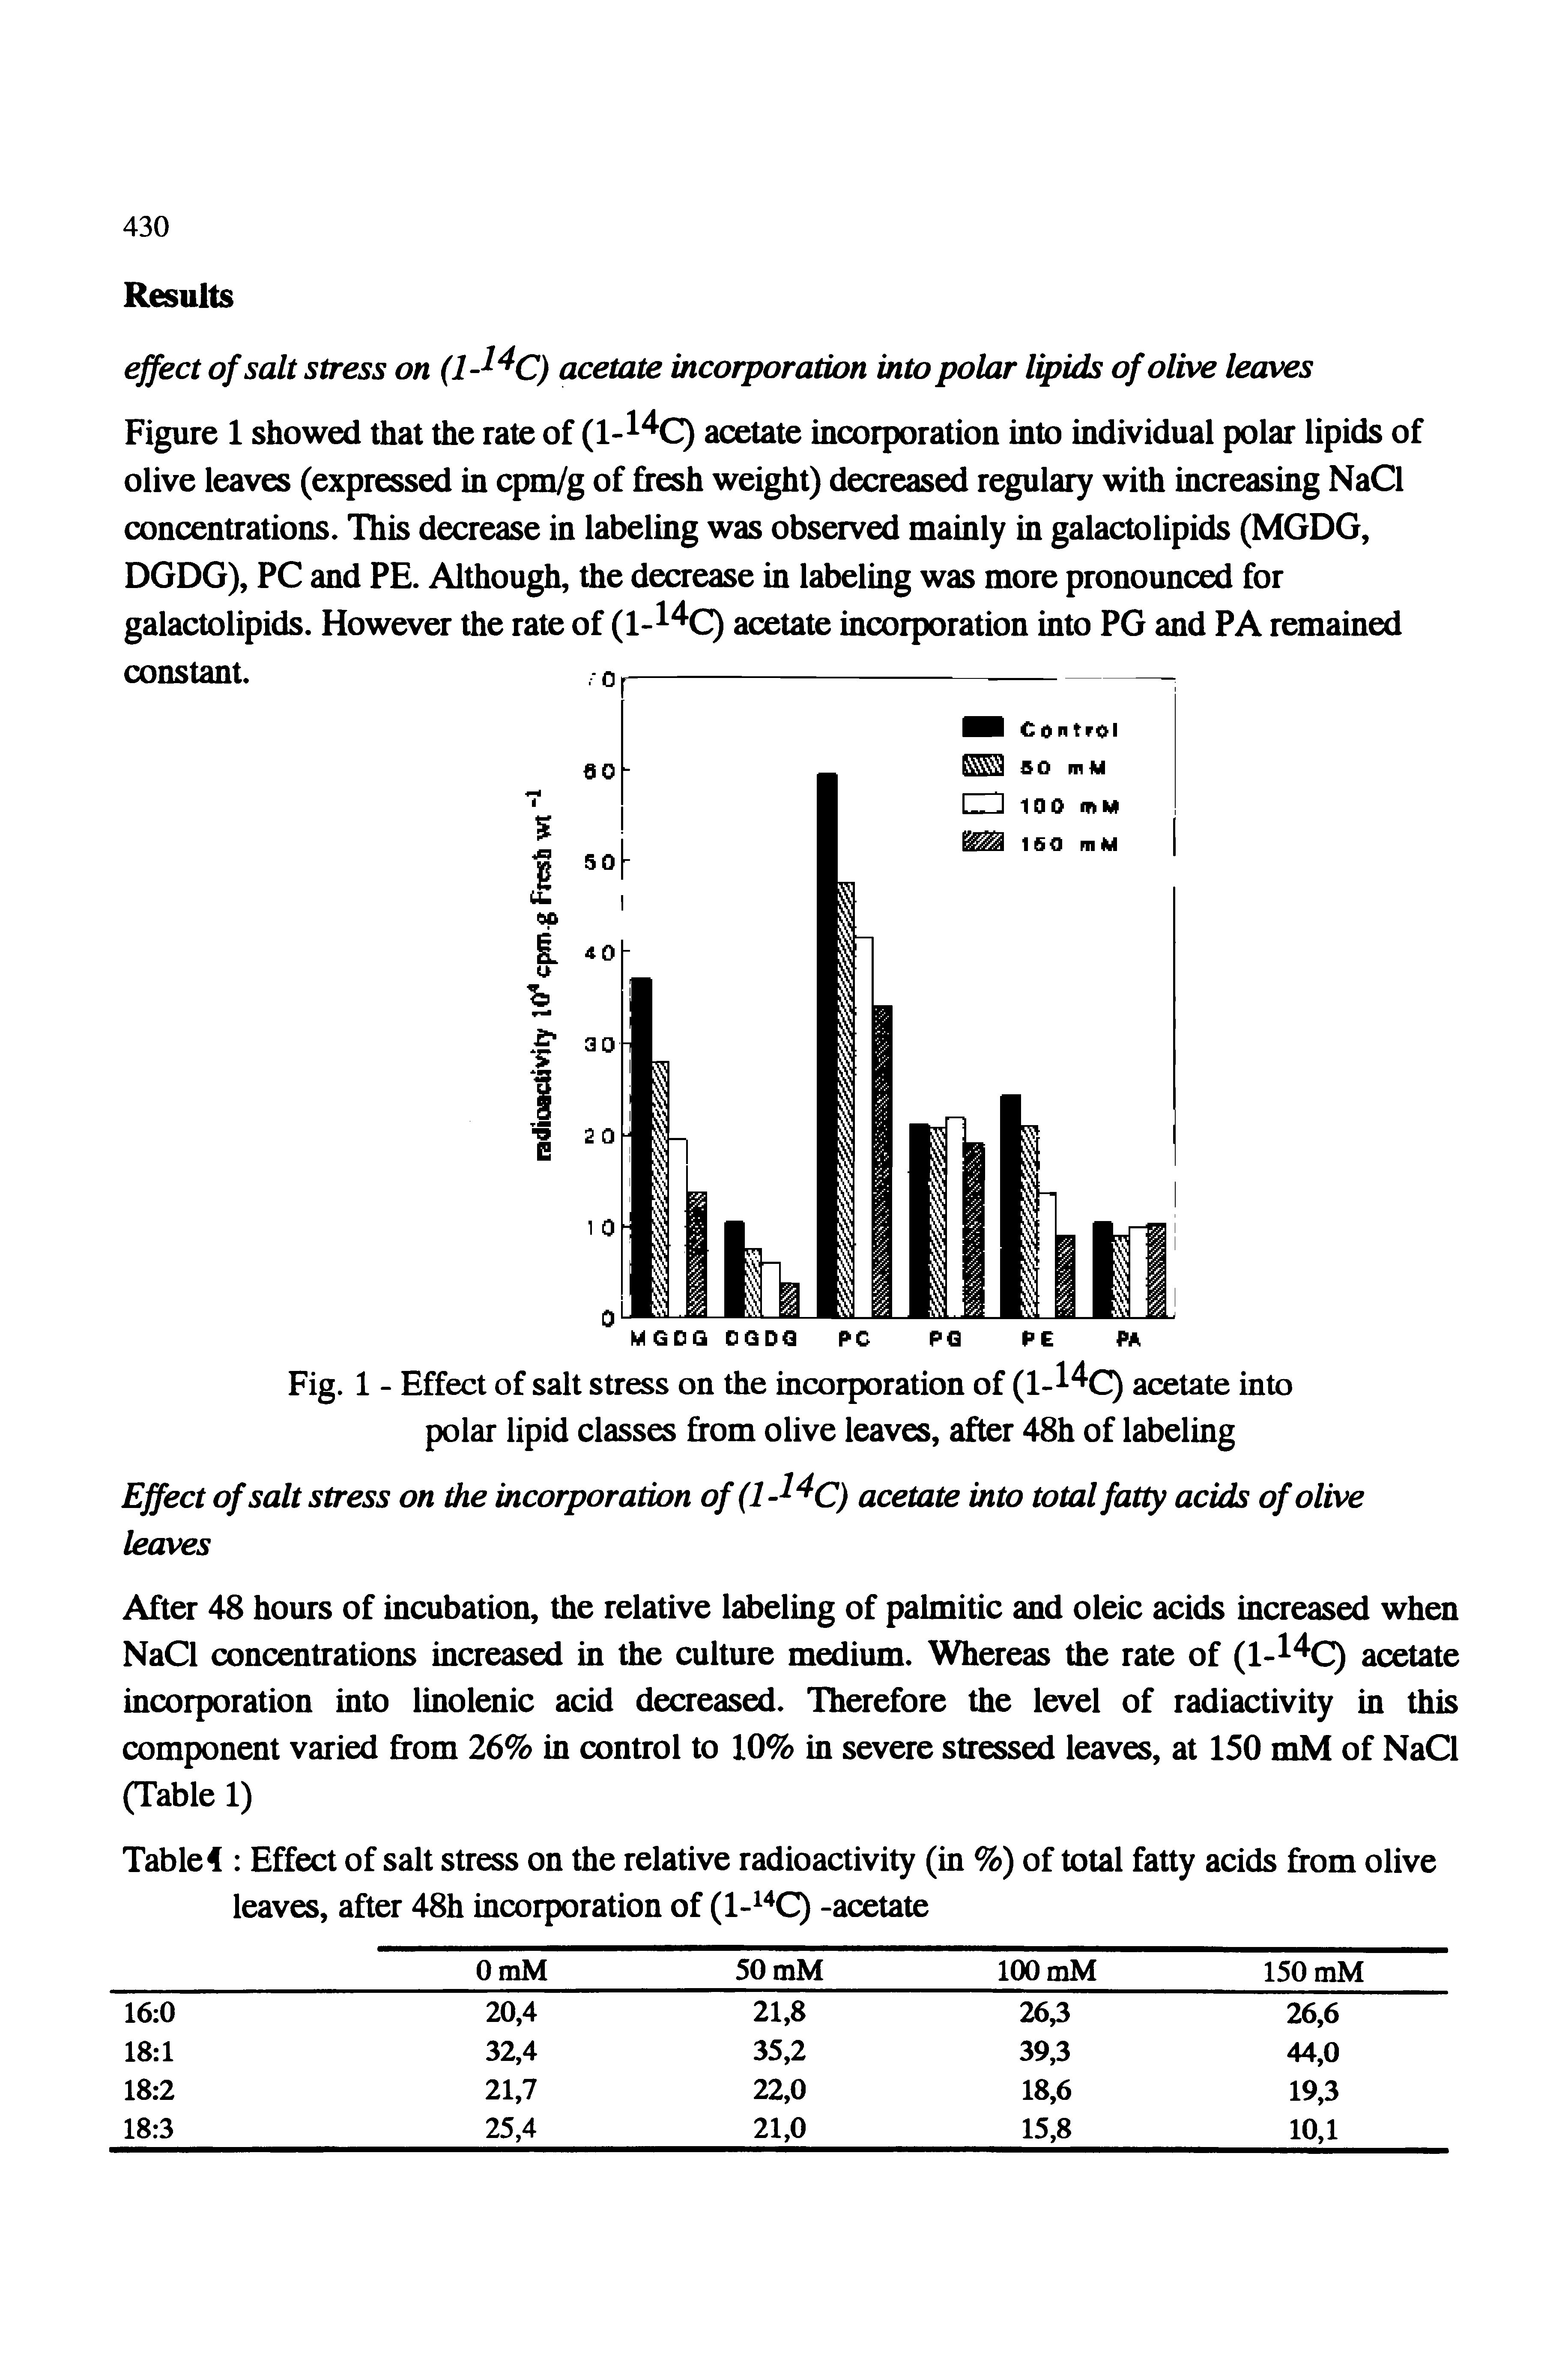 Table 4 Effect of salt stress on the relative radioactivity (in %) of total fatty acids from olive leaves, after 48h incorporation of (1- Q -acetate...